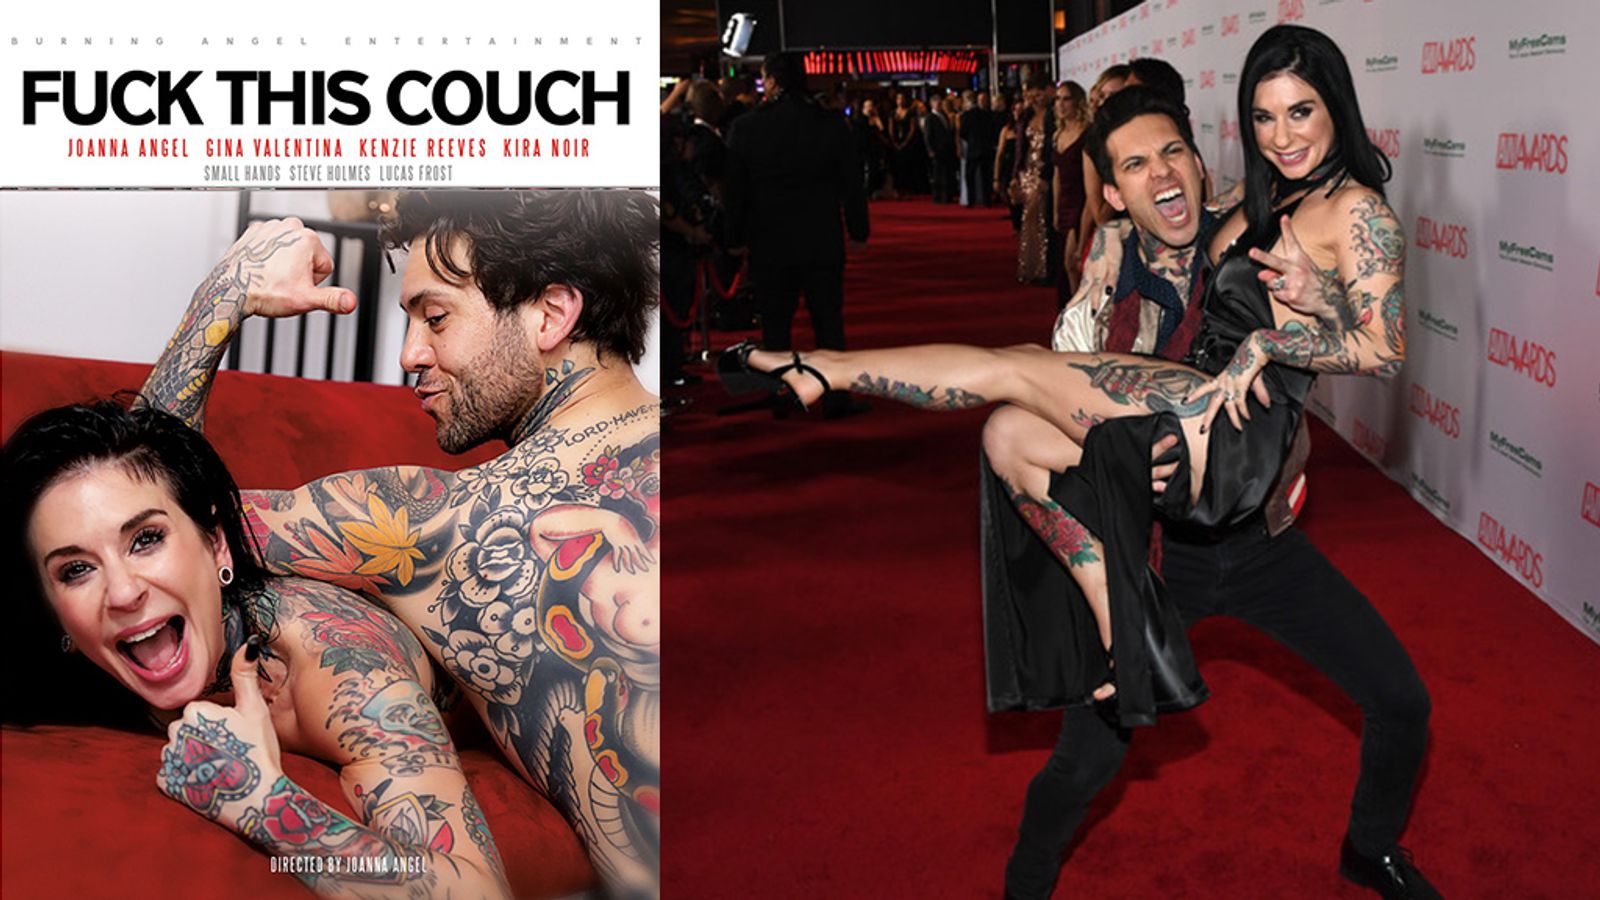 Joanna Angel & Small Hands Invite Friends to 'Fuck This Couch'